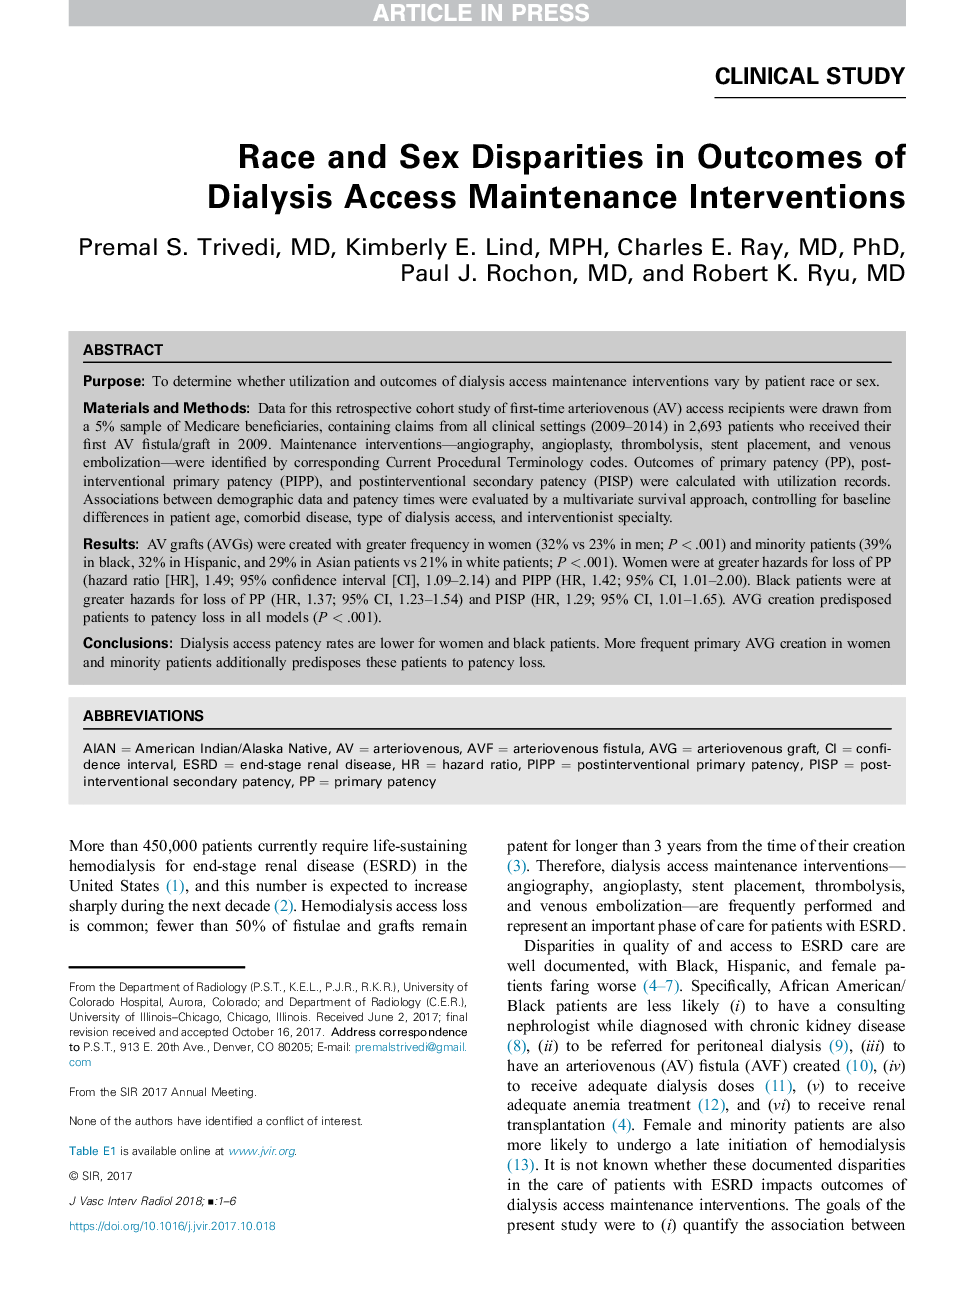 Race and Sex Disparities in Outcomes of Dialysis Access Maintenance Interventions